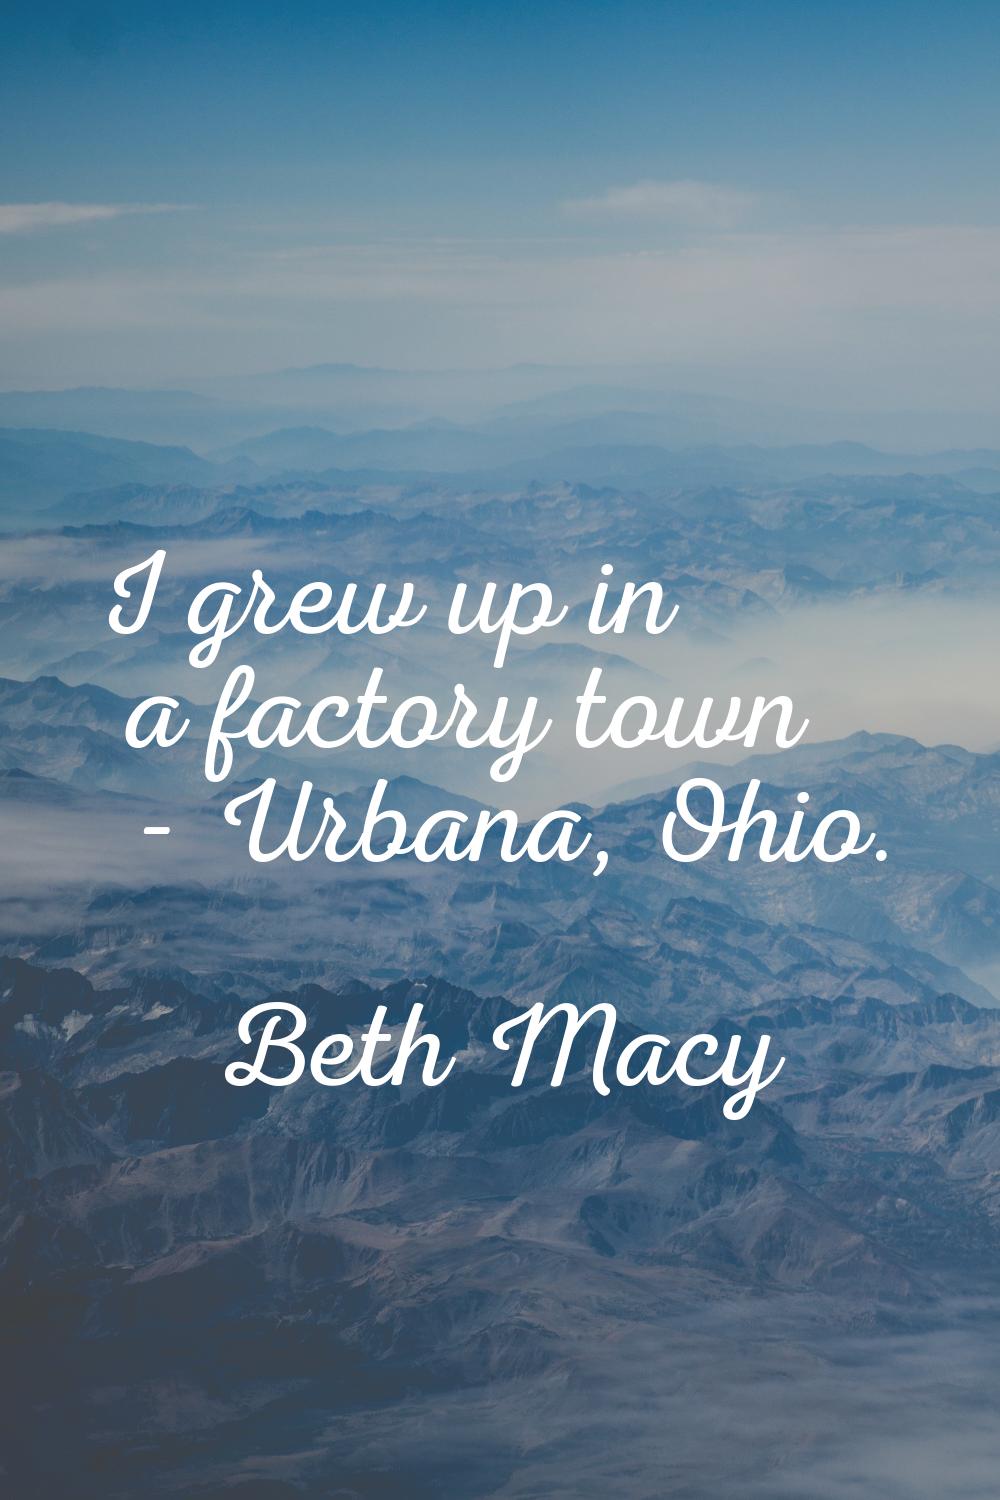 I grew up in a factory town - Urbana, Ohio.